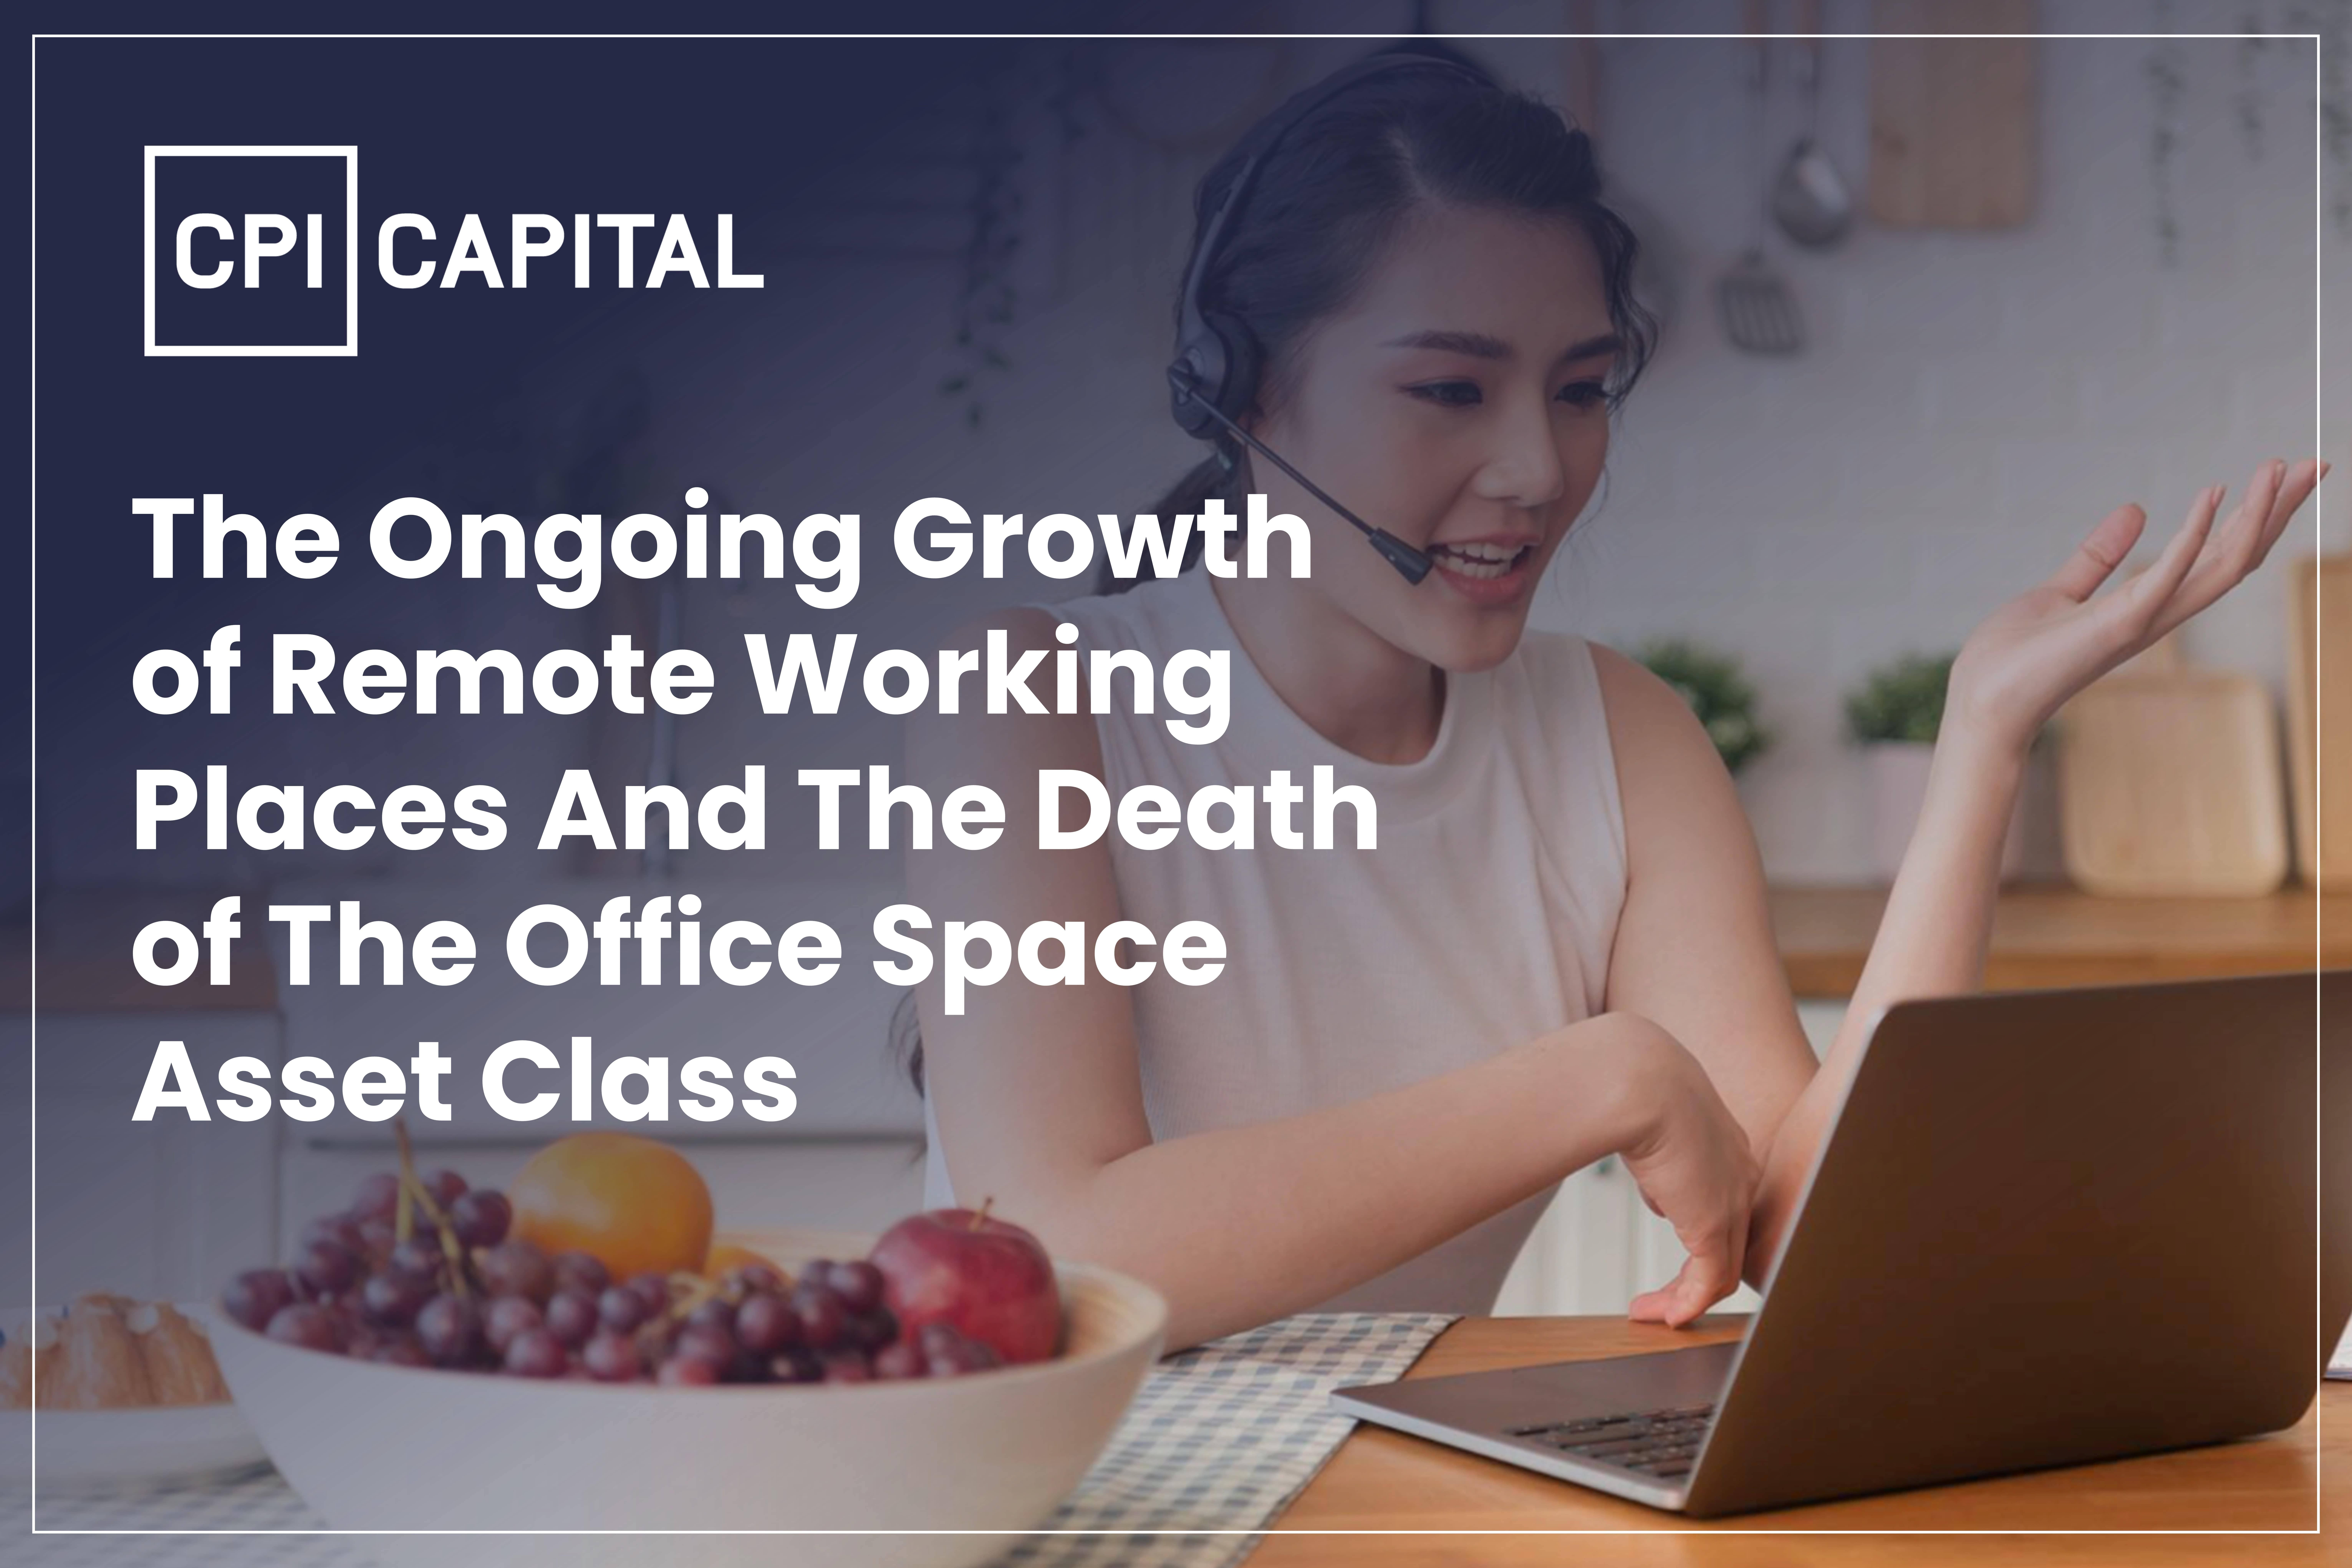 CPI capital_The Ongoing Growth of Remote Working Places And The Death of The Office Space Asset Class